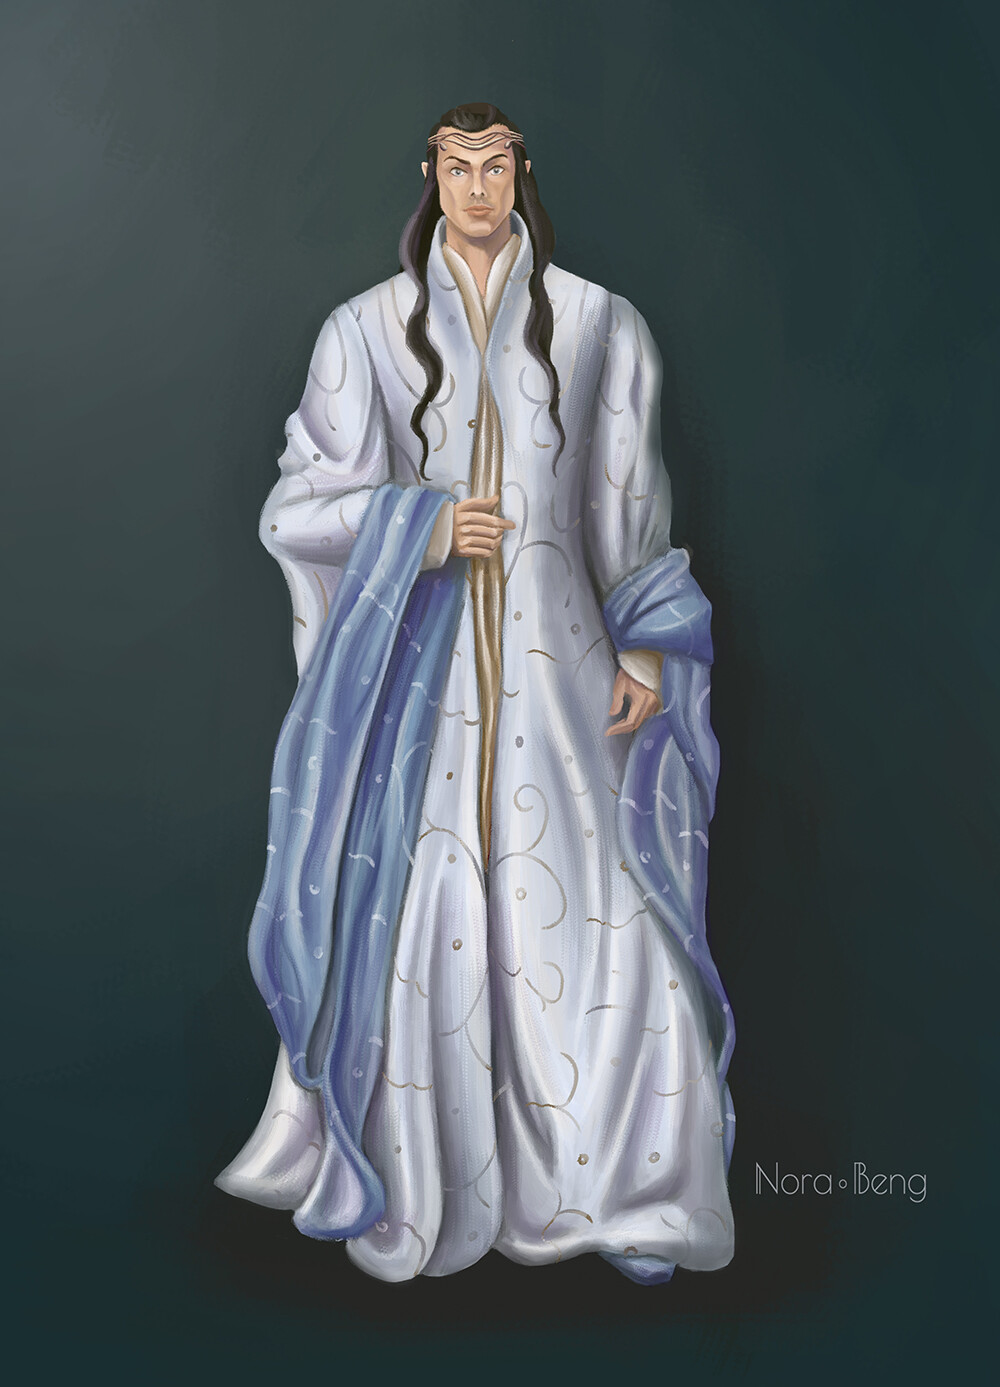 ArtStation - Elrond, the Lord of Rivendell